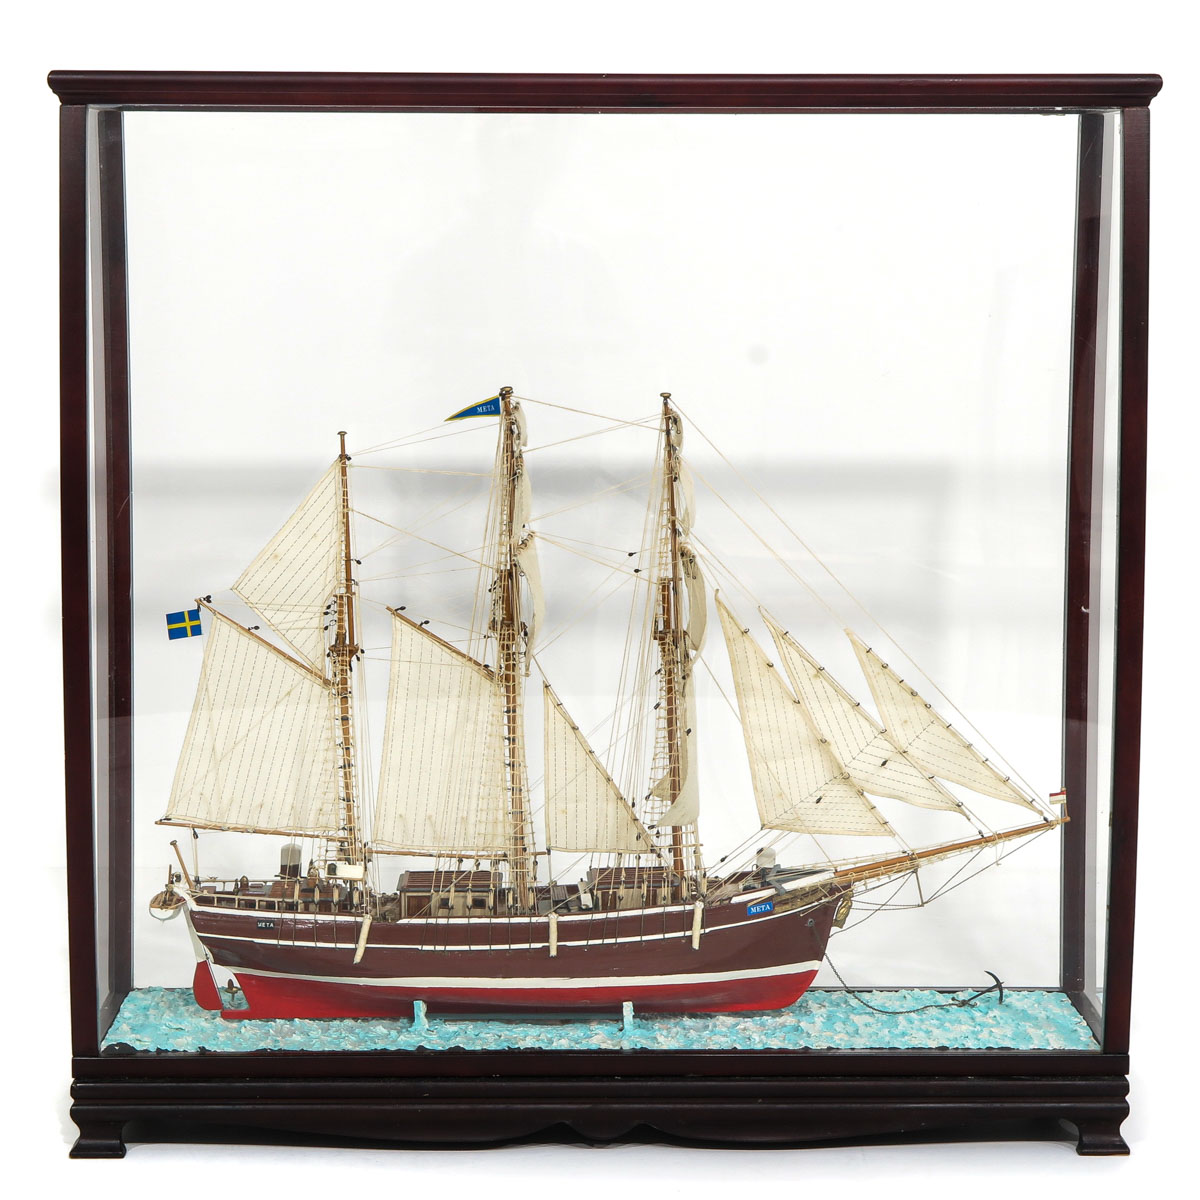 A Model Ship - Image 3 of 10